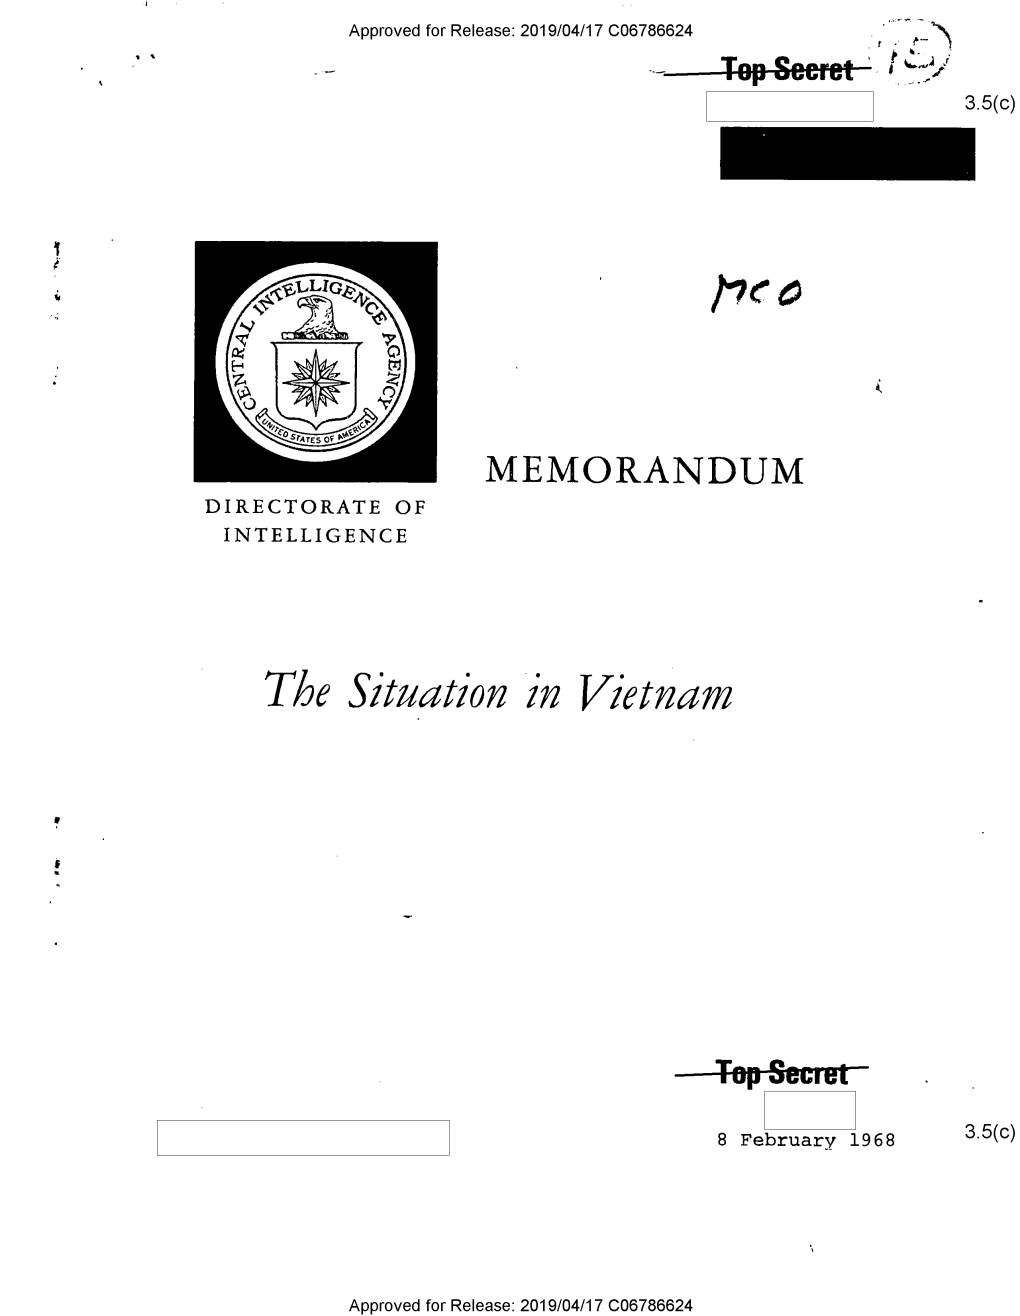 Report on the Situation in Vietnam, 8 February 1968